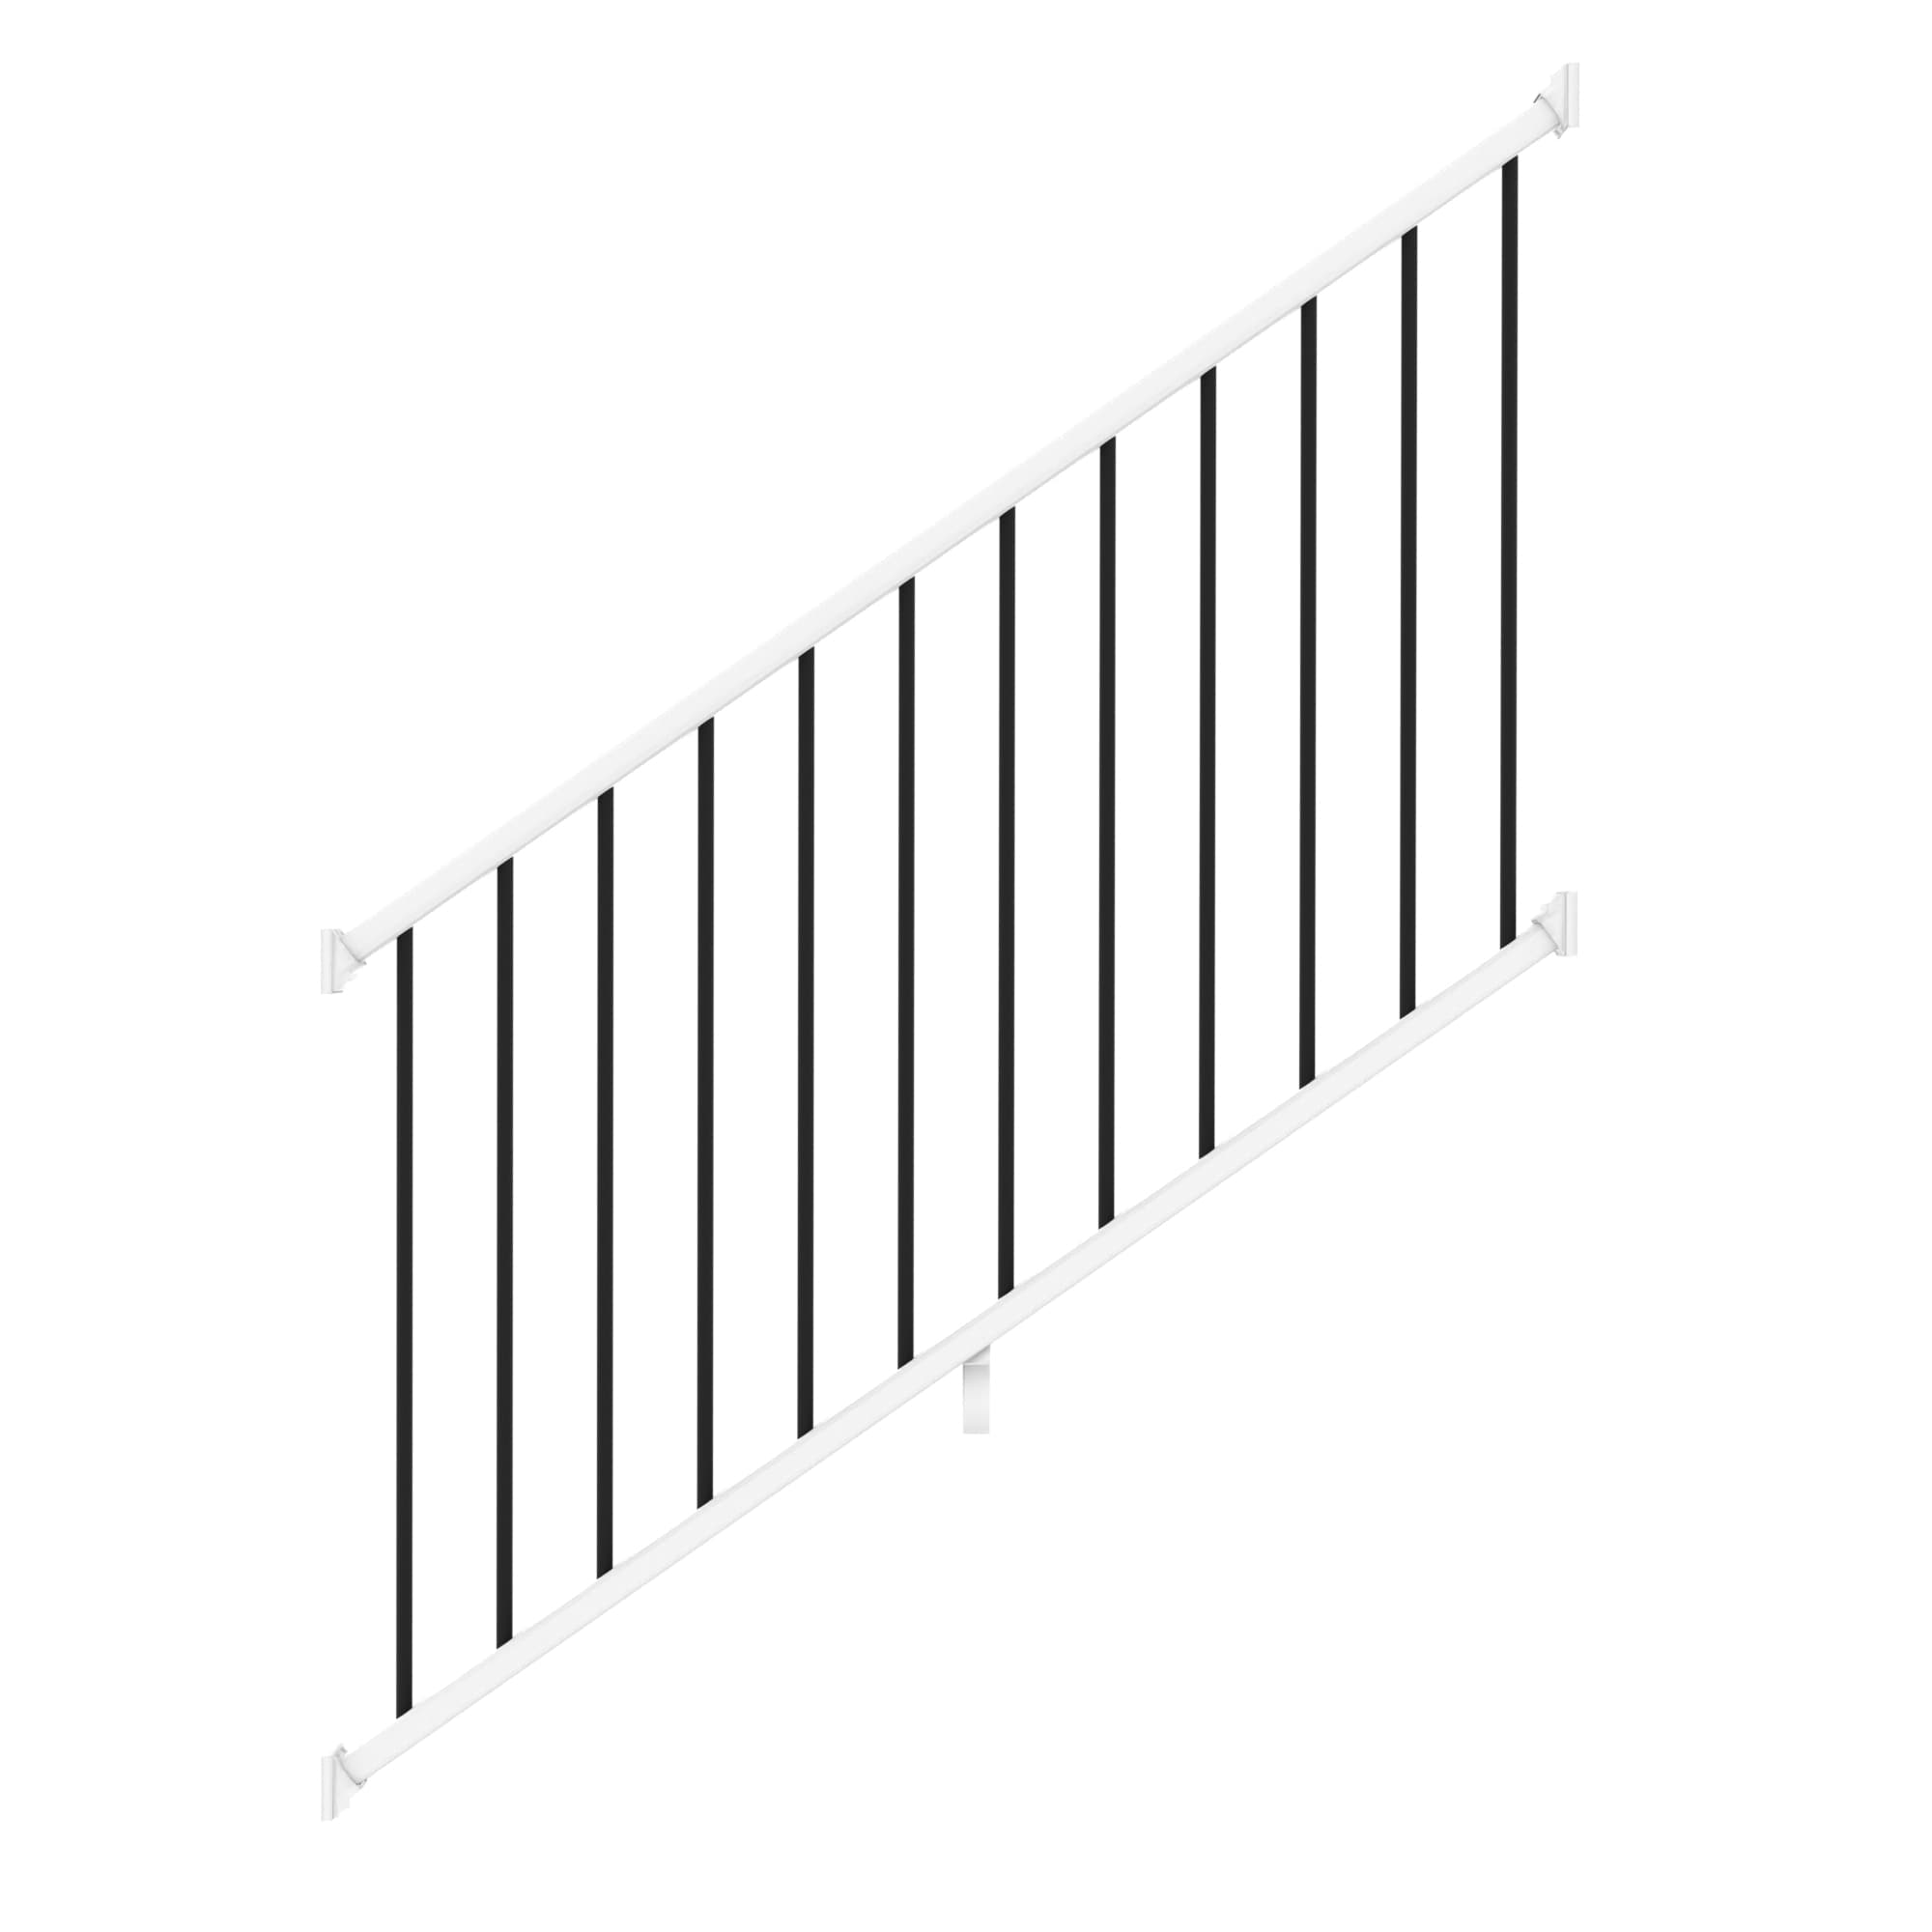 Outdoor Stair Railing Kit at Lowes.com